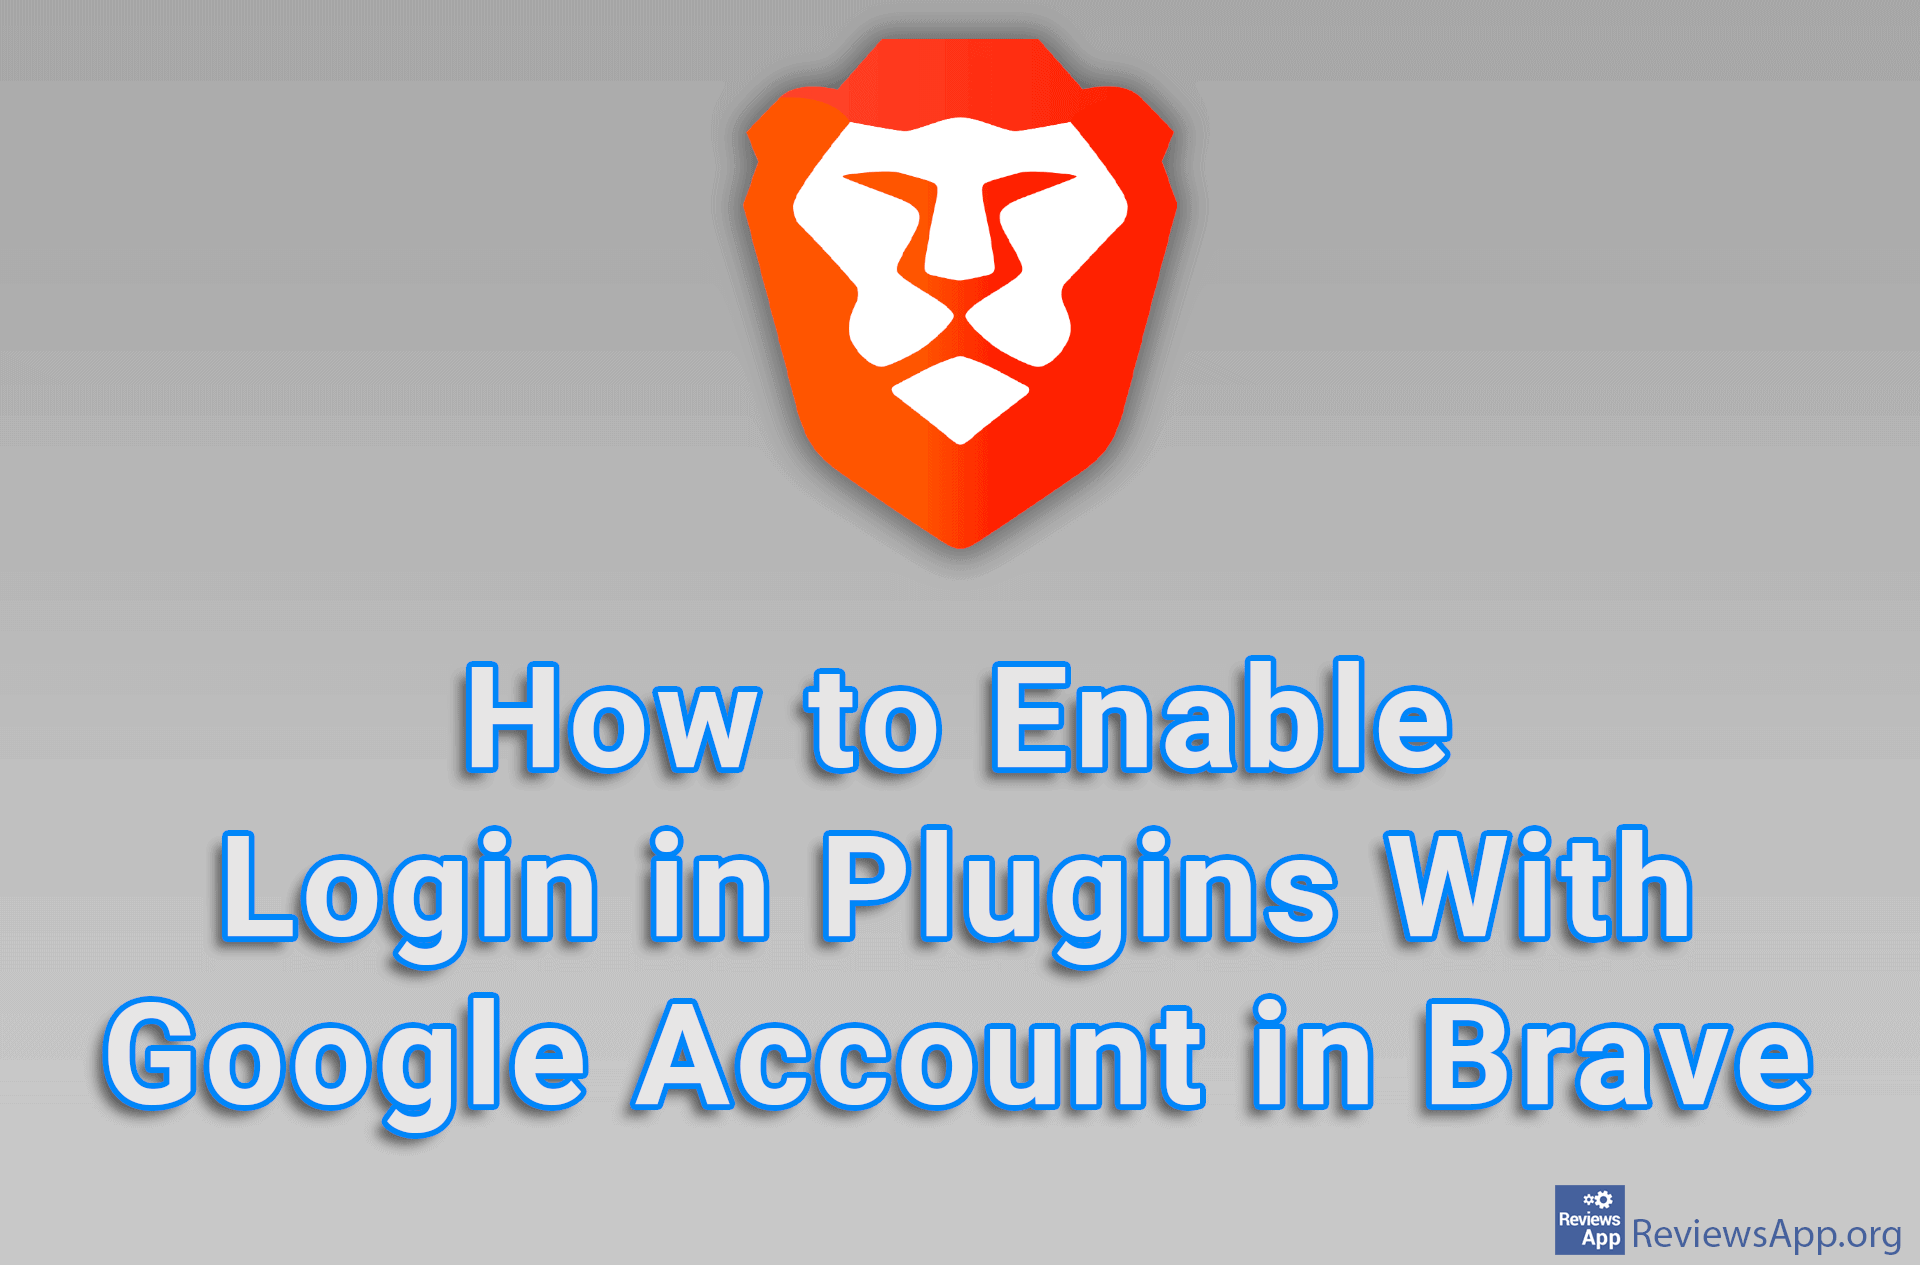 How to Enable Login in Plugins With Google Account in Brave